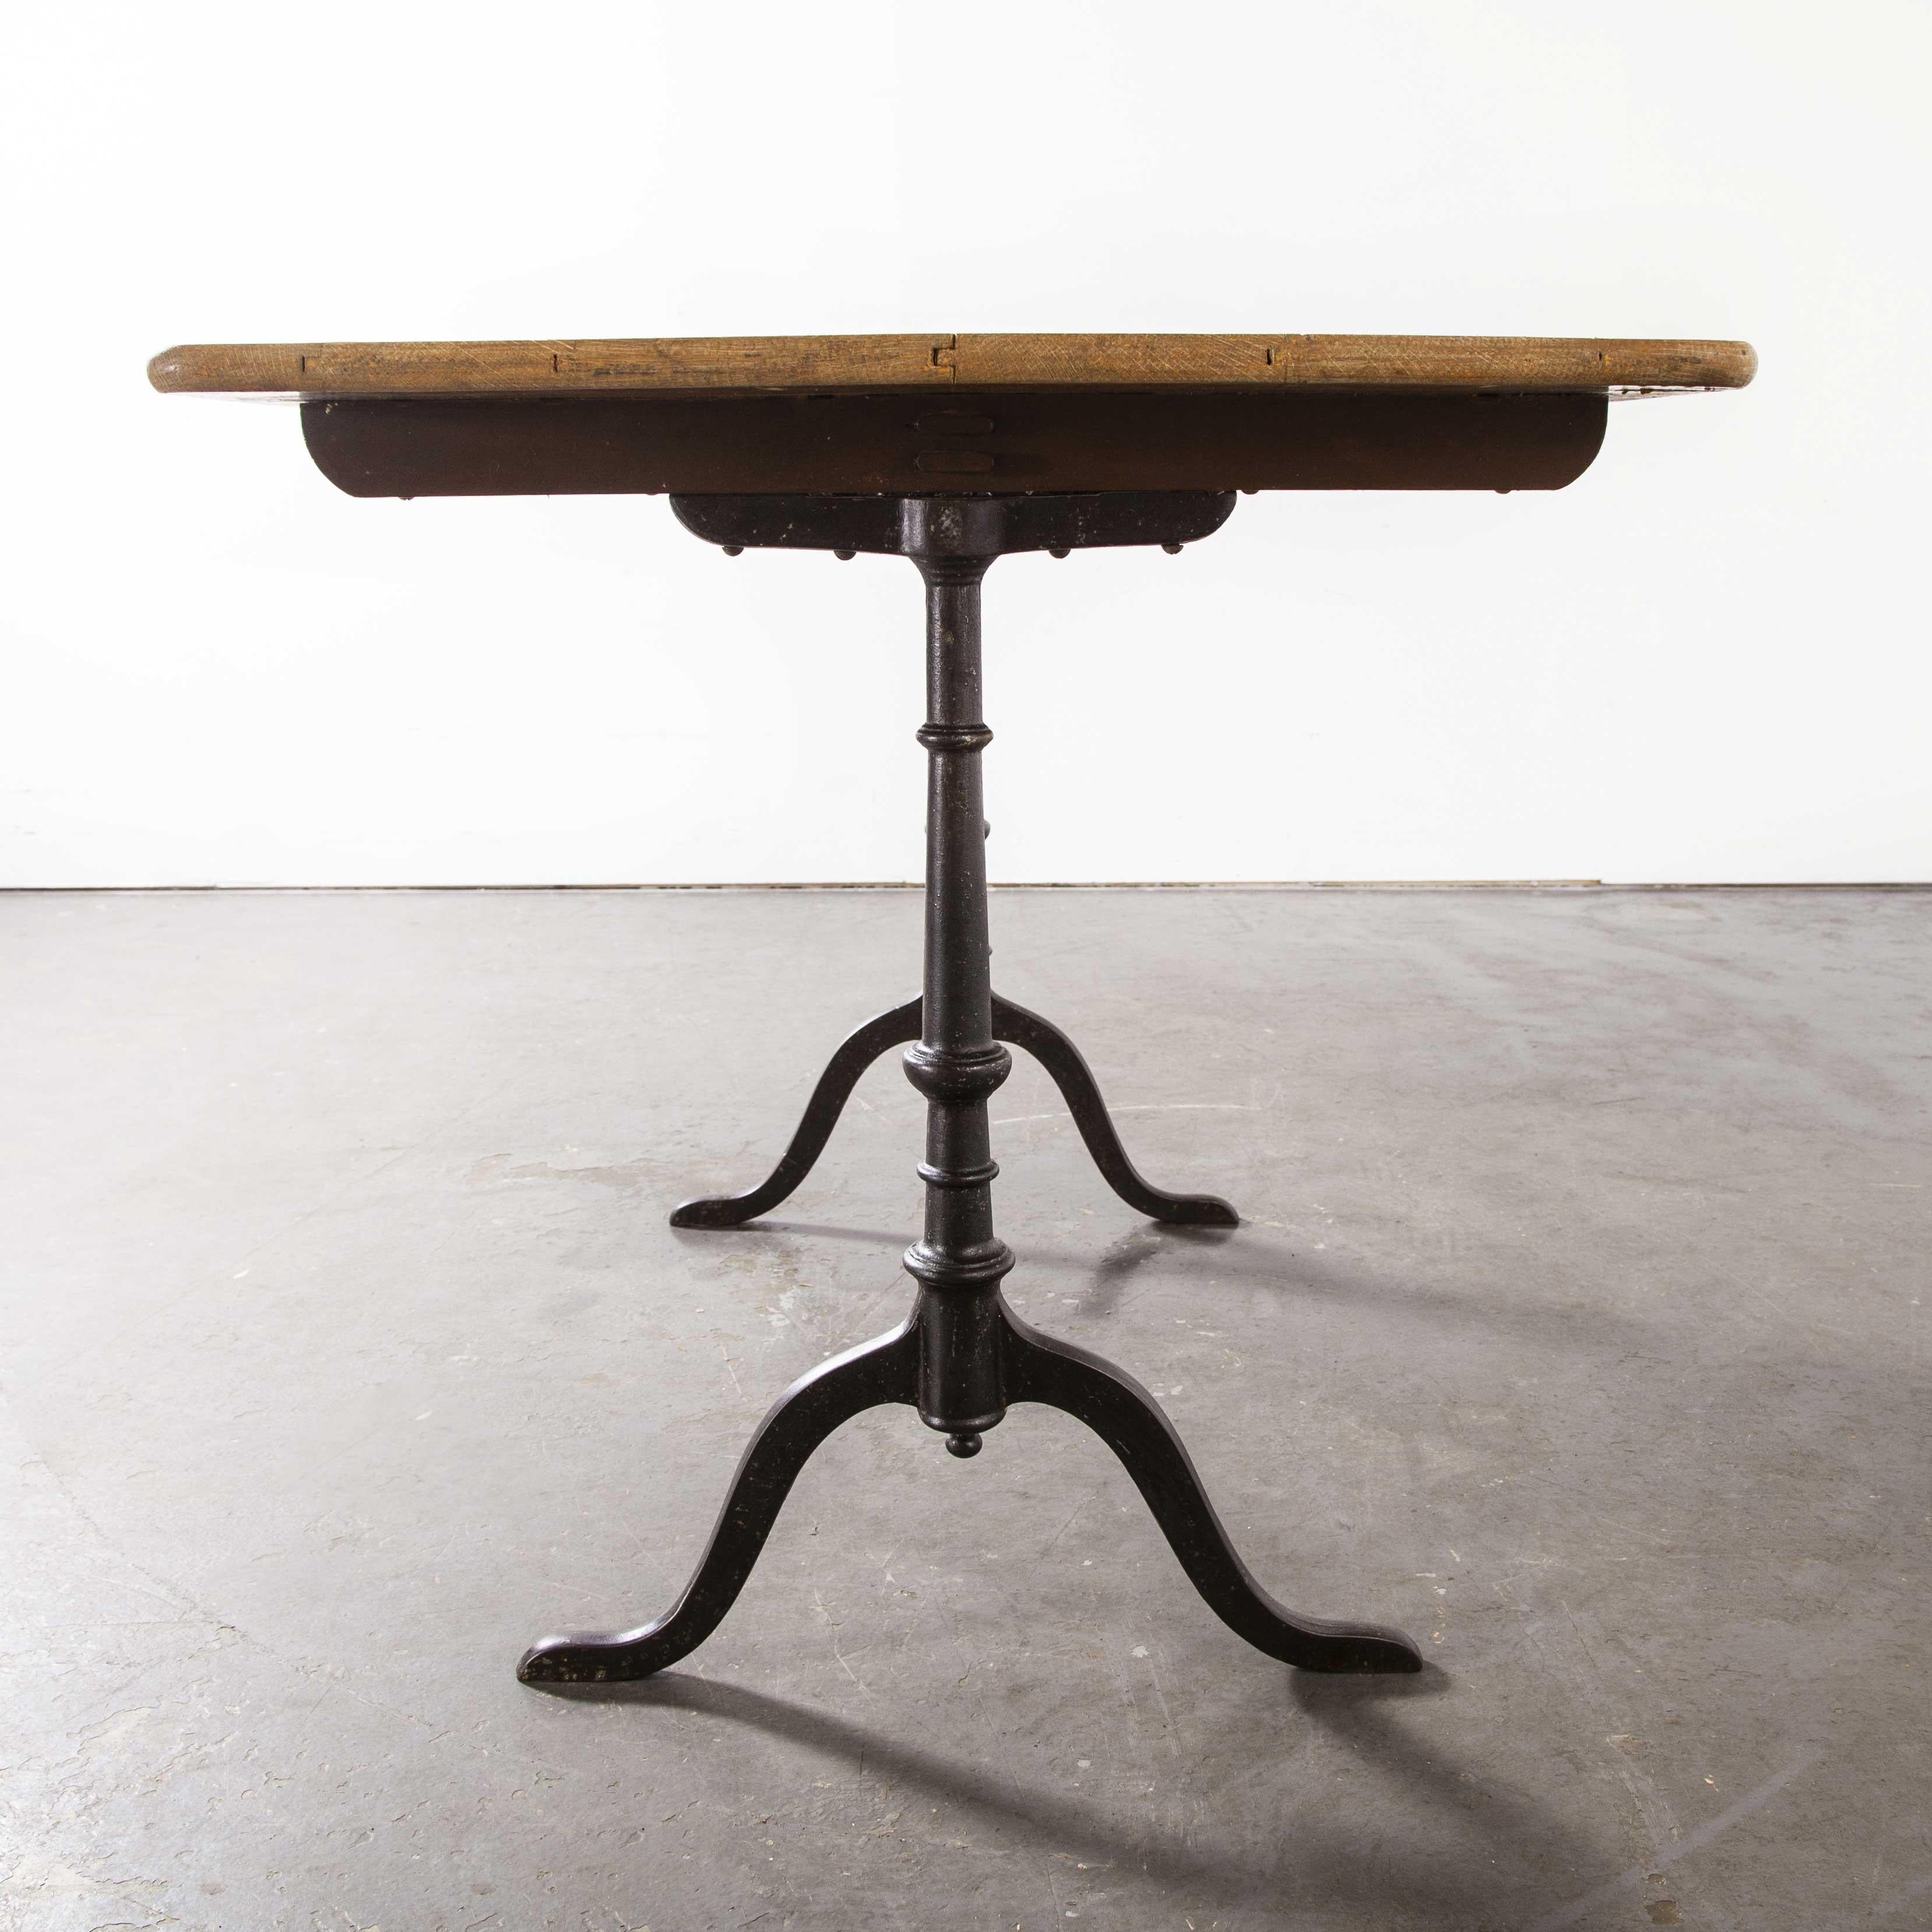 1930s Baumann cafe - bistro dining table - cast metal legs

1930s Baumann cafe - bistro dining table - cast metal legs. Baumann is a slightly off the radar French producer just starting to gain traction in the market. Baumann was founded in 1901,